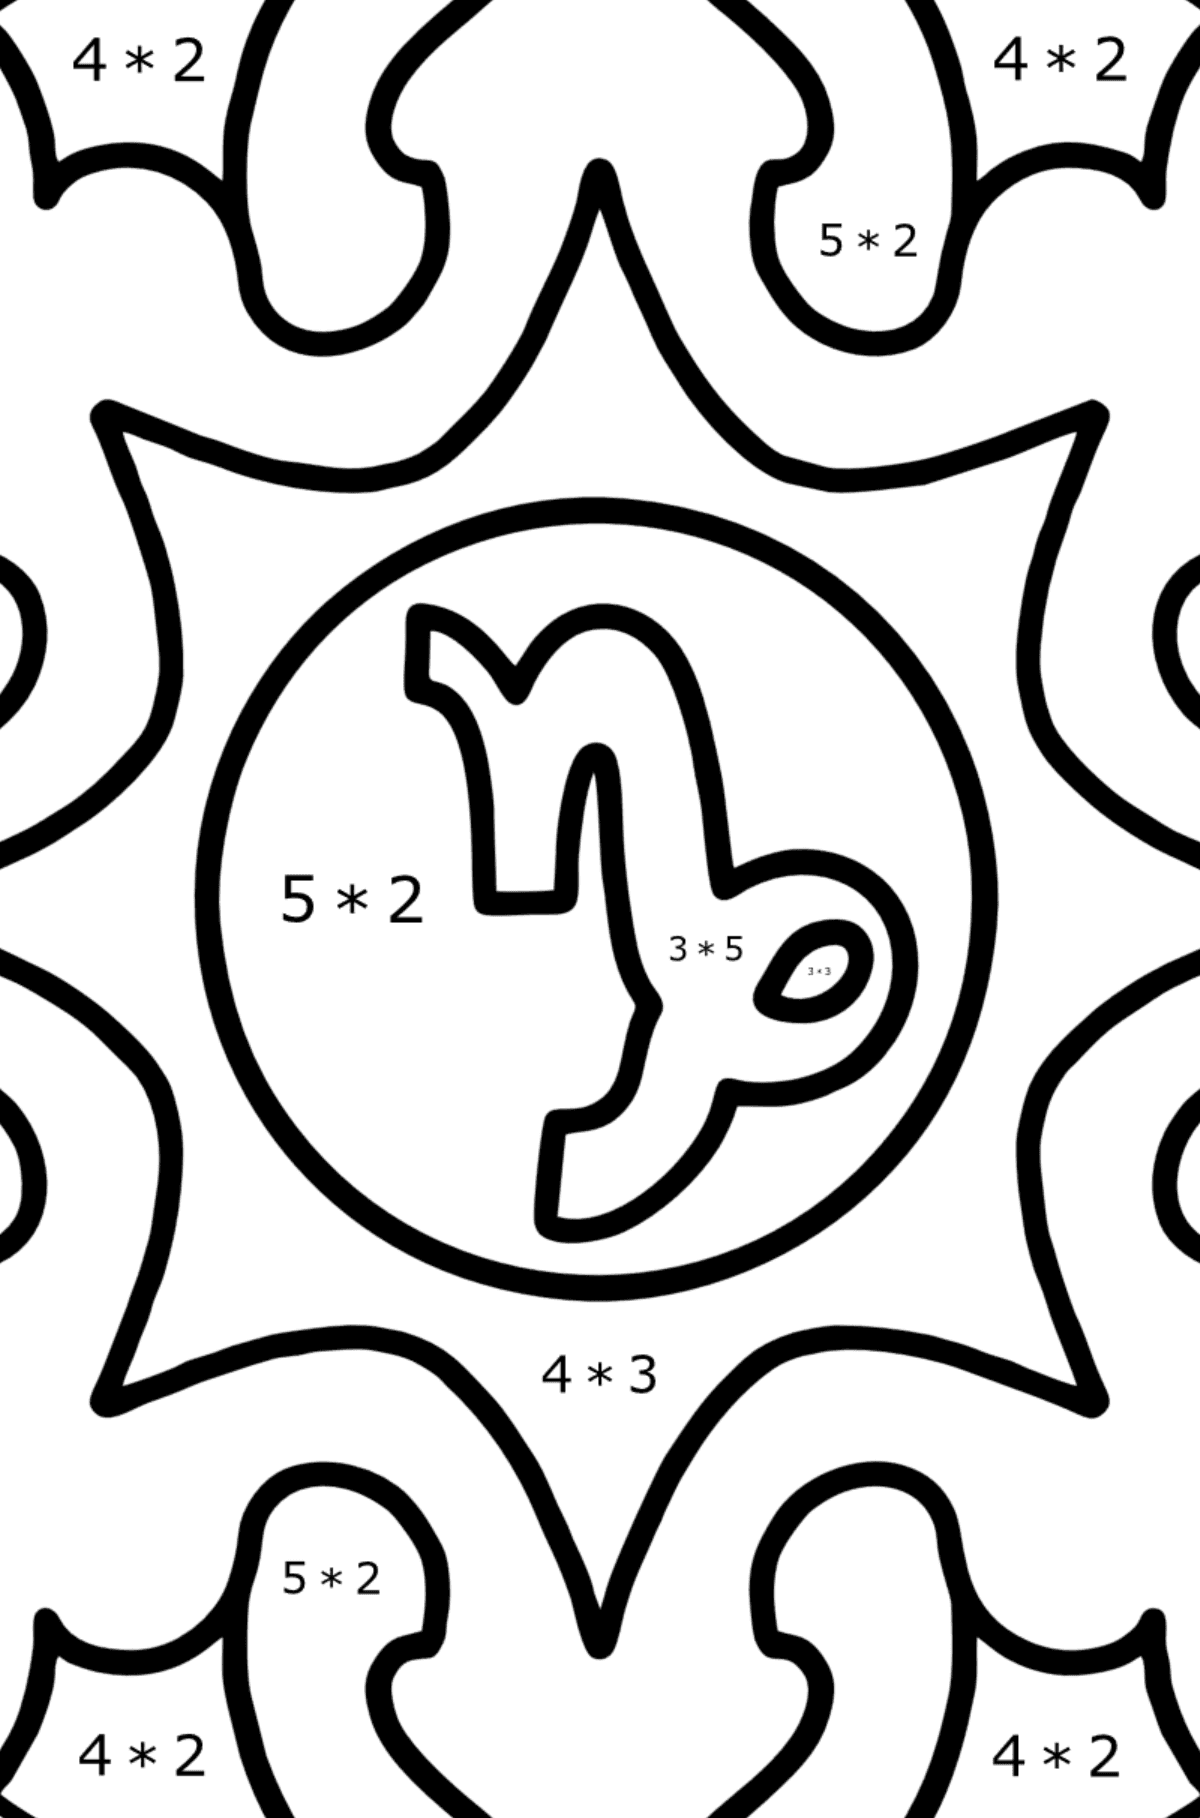 Coloring page - Capricorn zodiac sign - Math Coloring - Multiplication for Kids